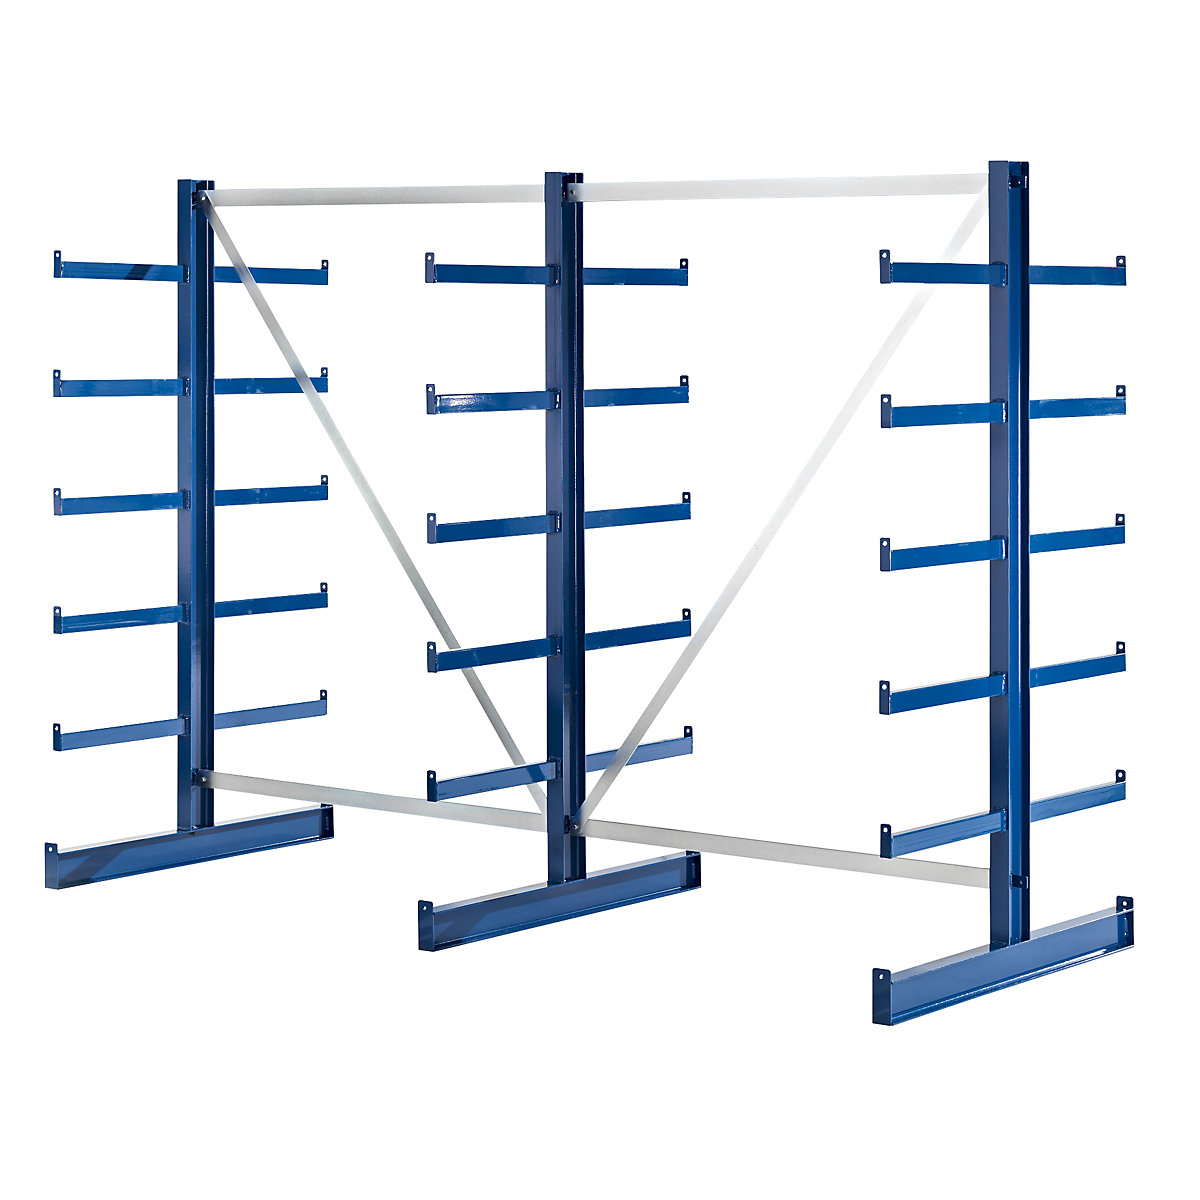 Cantilever racking unit with identical cantilever arm length – eurokraft pro, shelf unit length 2700 mm, double sided, gentian blue-3